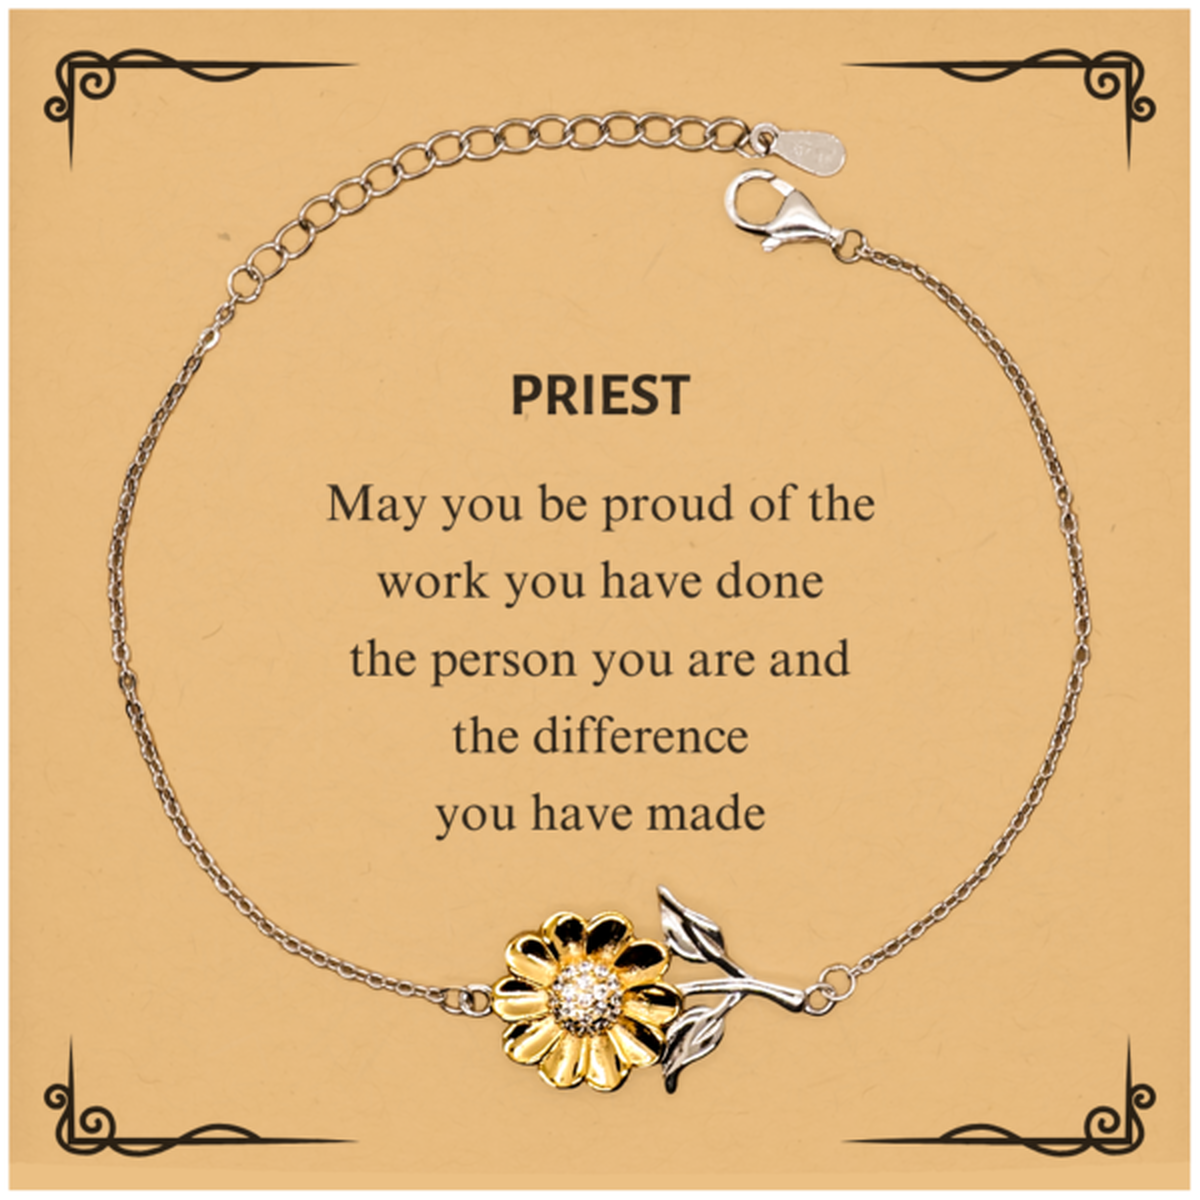 Priest May you be proud of the work you have done, Retirement Priest Sunflower Bracelet for Colleague Appreciation Gifts Amazing for Priest